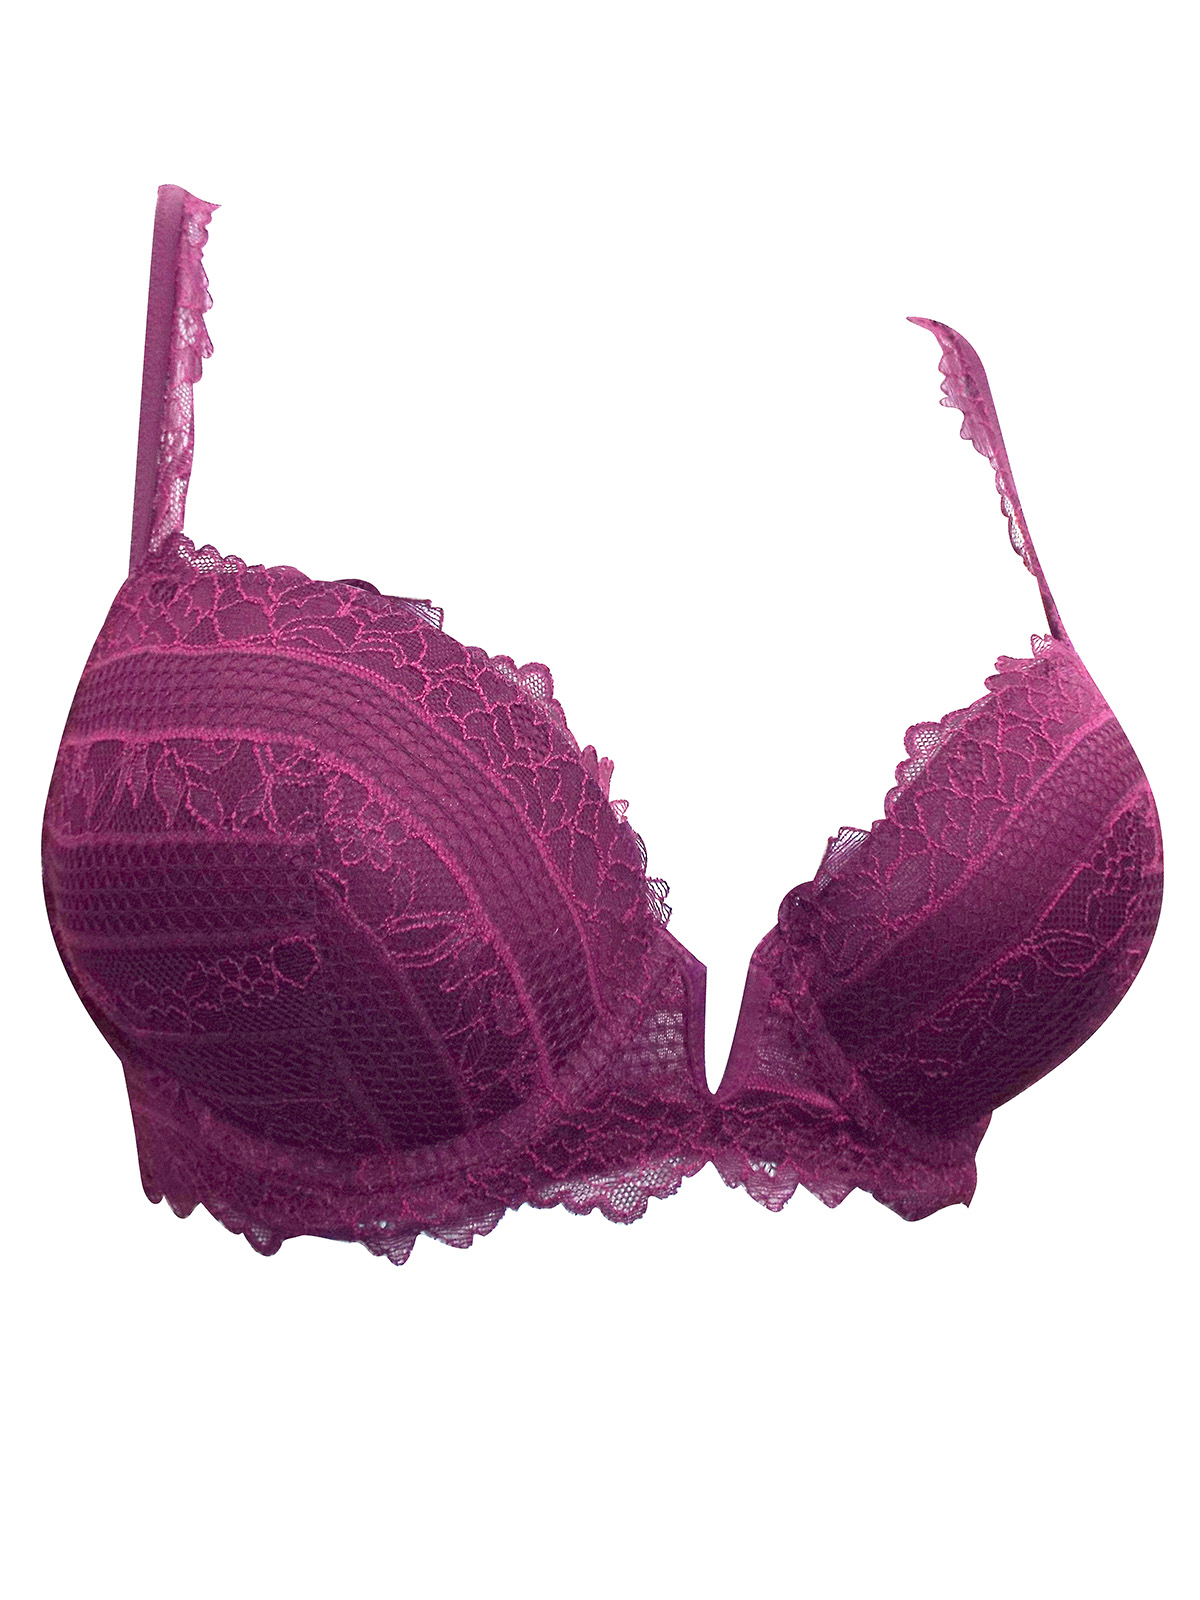  - - ASSORTED Bras - Size 32 to 38 (AA-A-B-C)